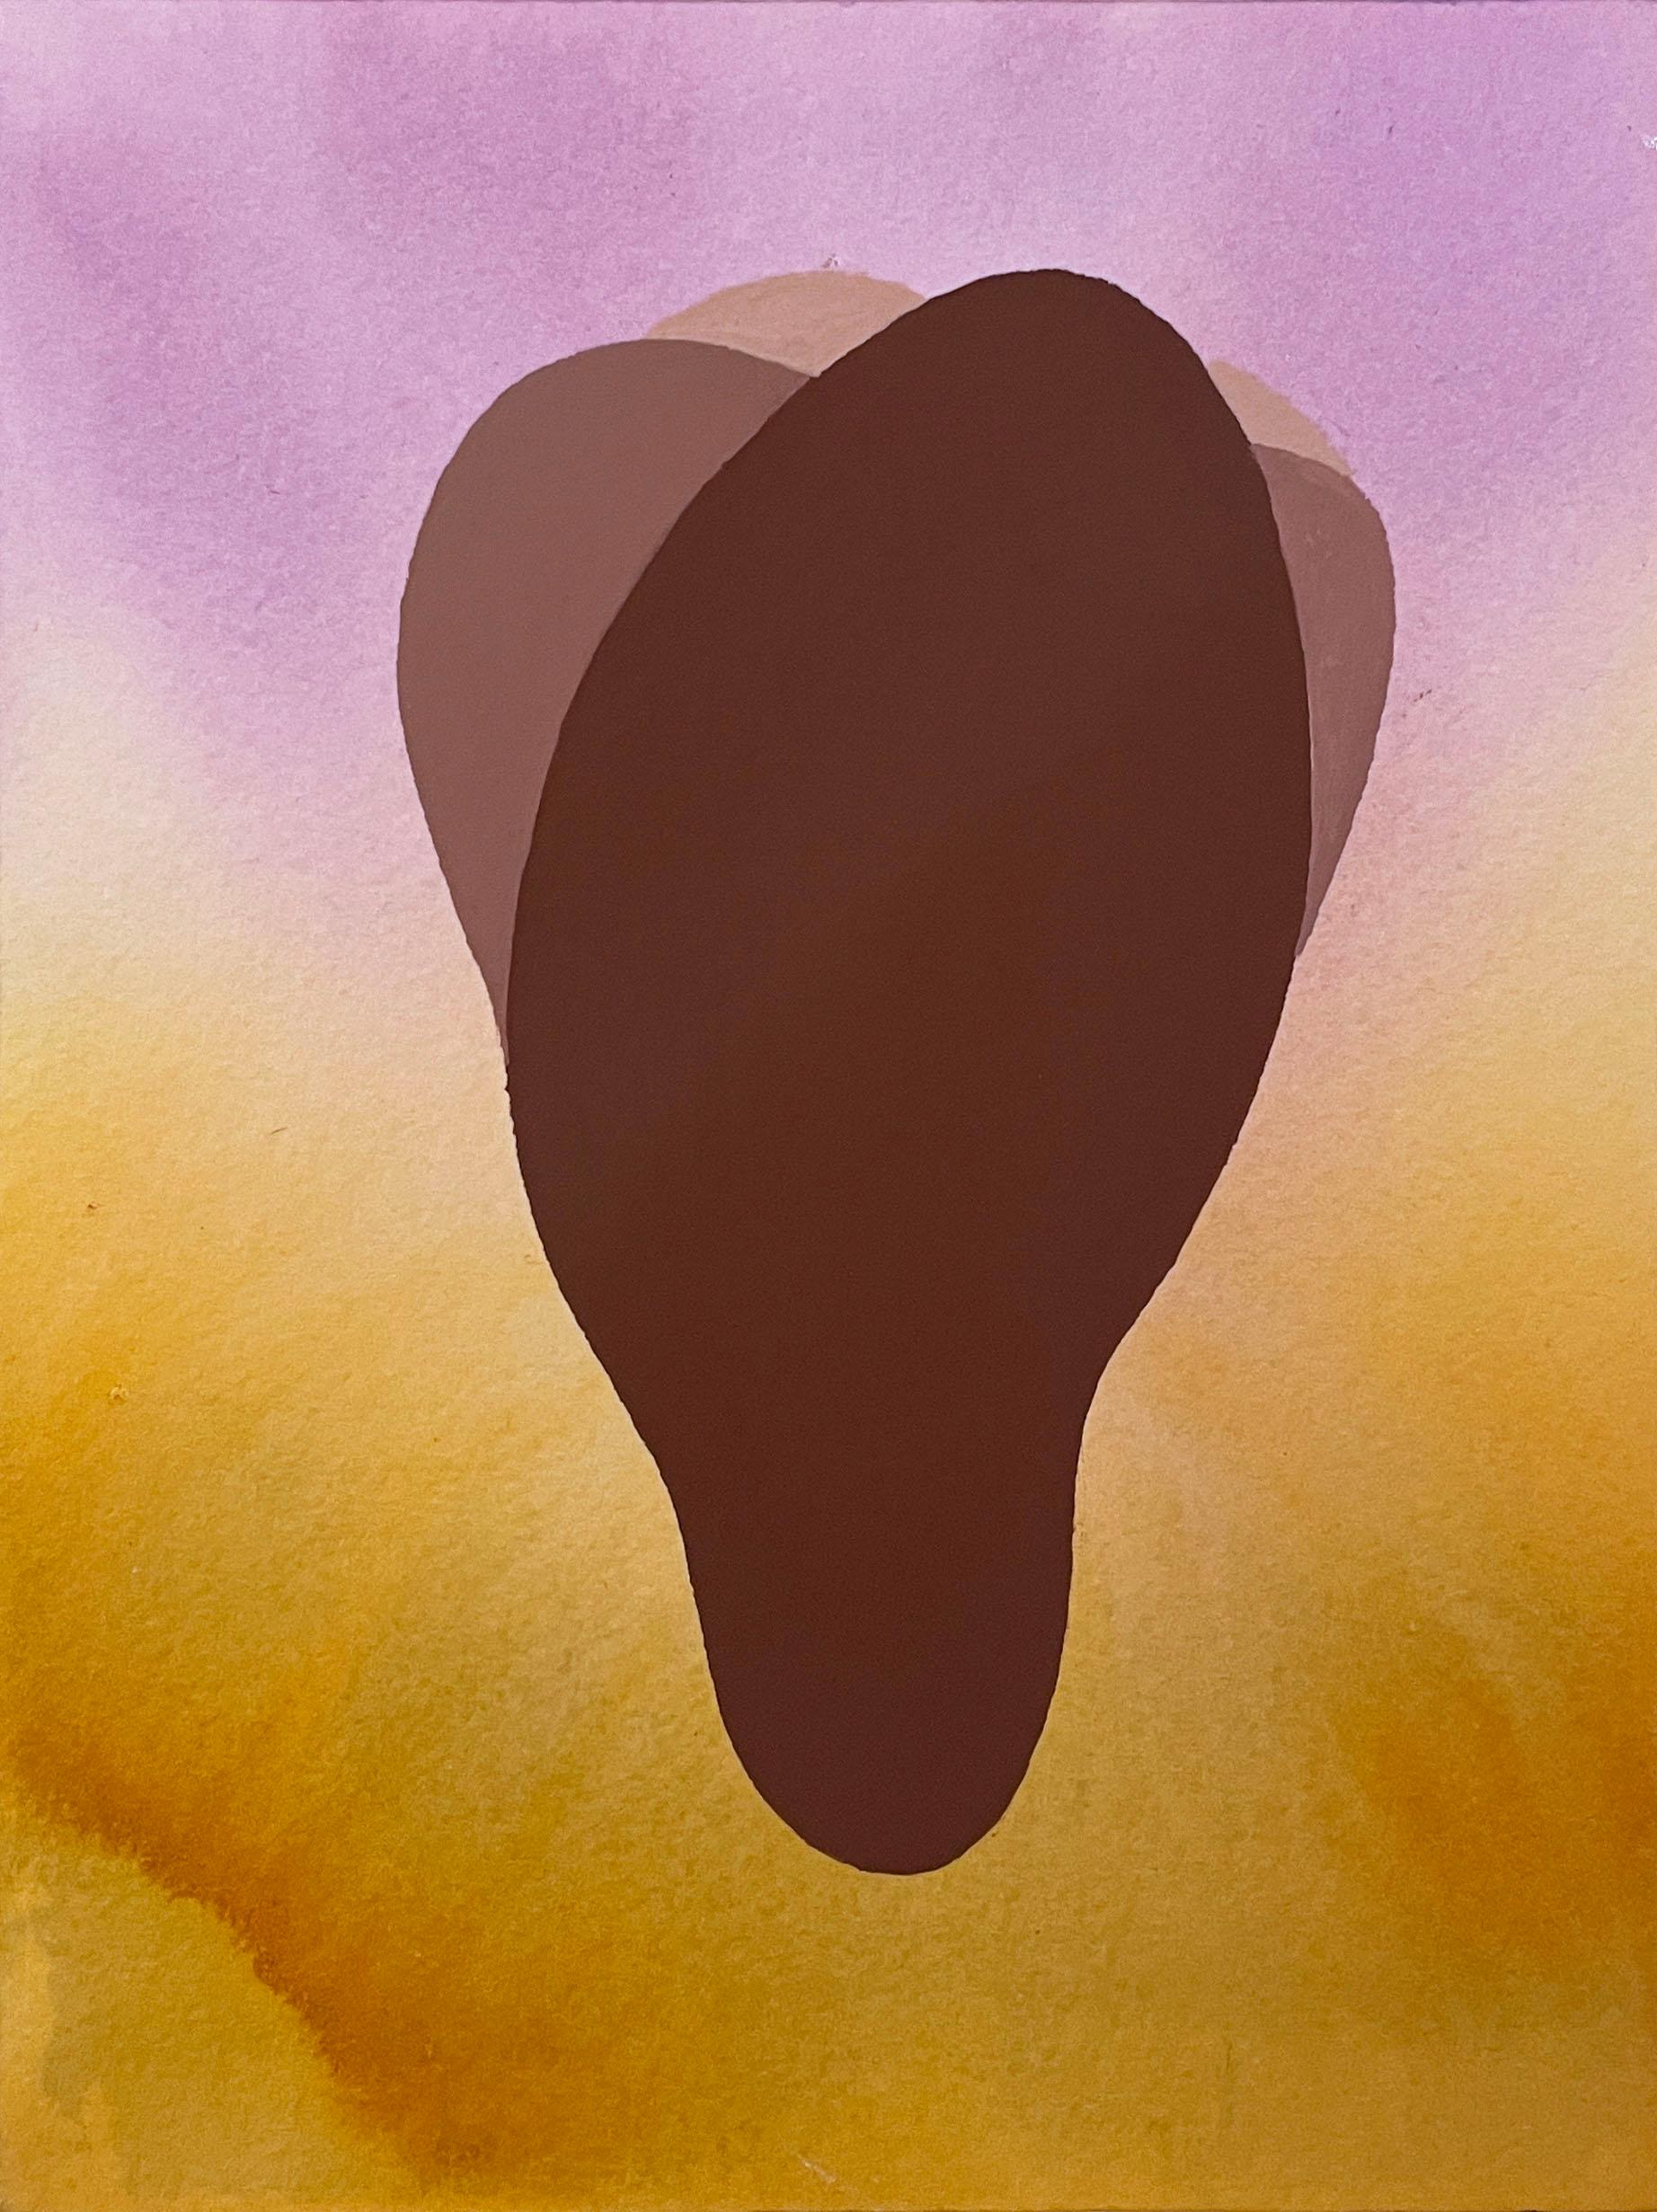 Shamona Stokes Abstract Drawing - Bud (2022), gold & purple color gradient, flower petals, watercolor, matte